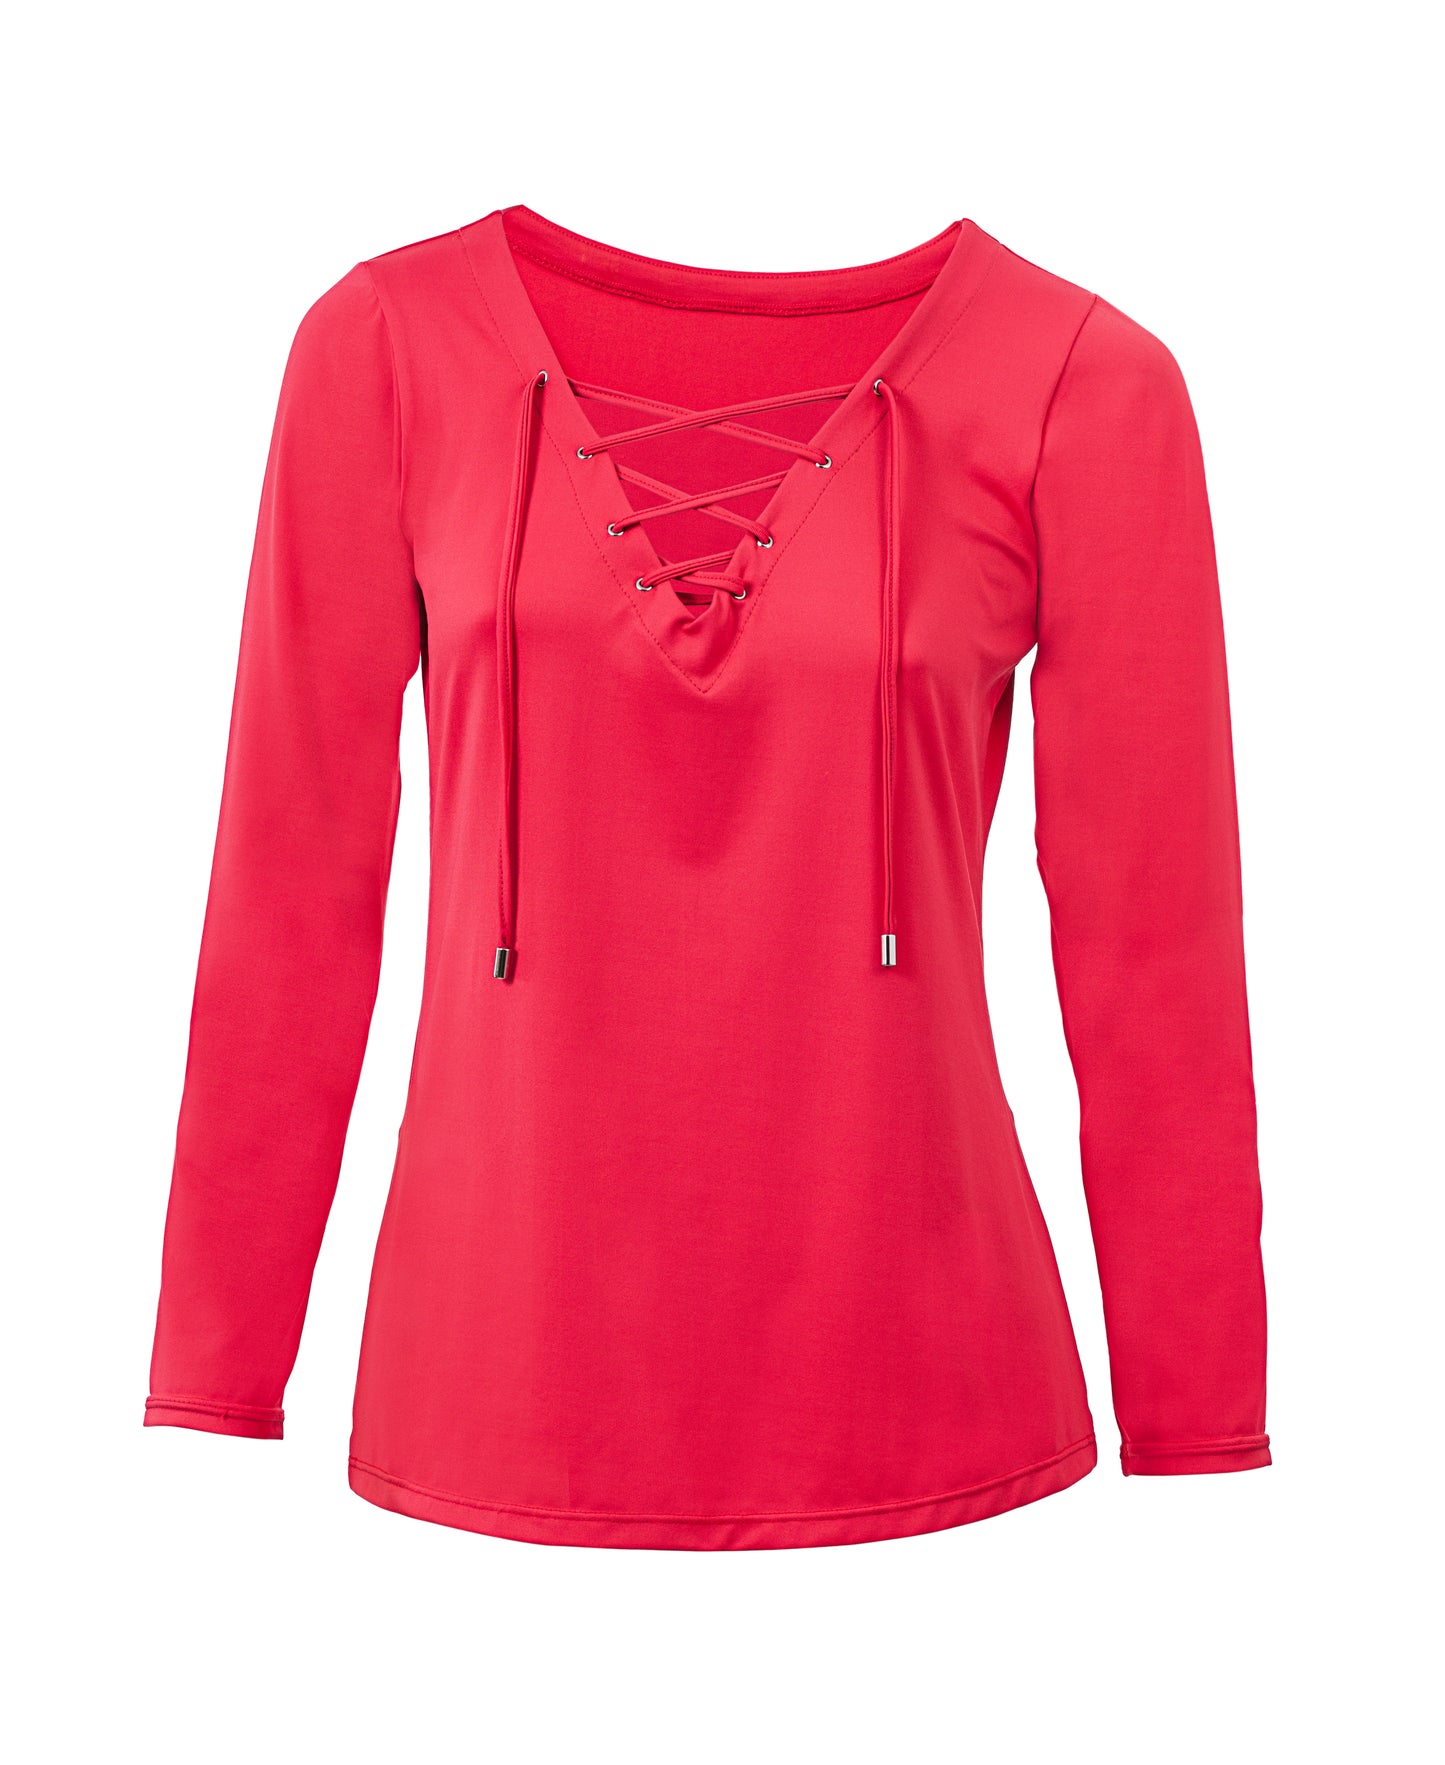 Invel® Therapeutic Lace-Up Top – Women’s Long-Sleeve Classic "Barroco" Blouse with Bioceramic MIG3® Far-Infrared Technology - Invel North America